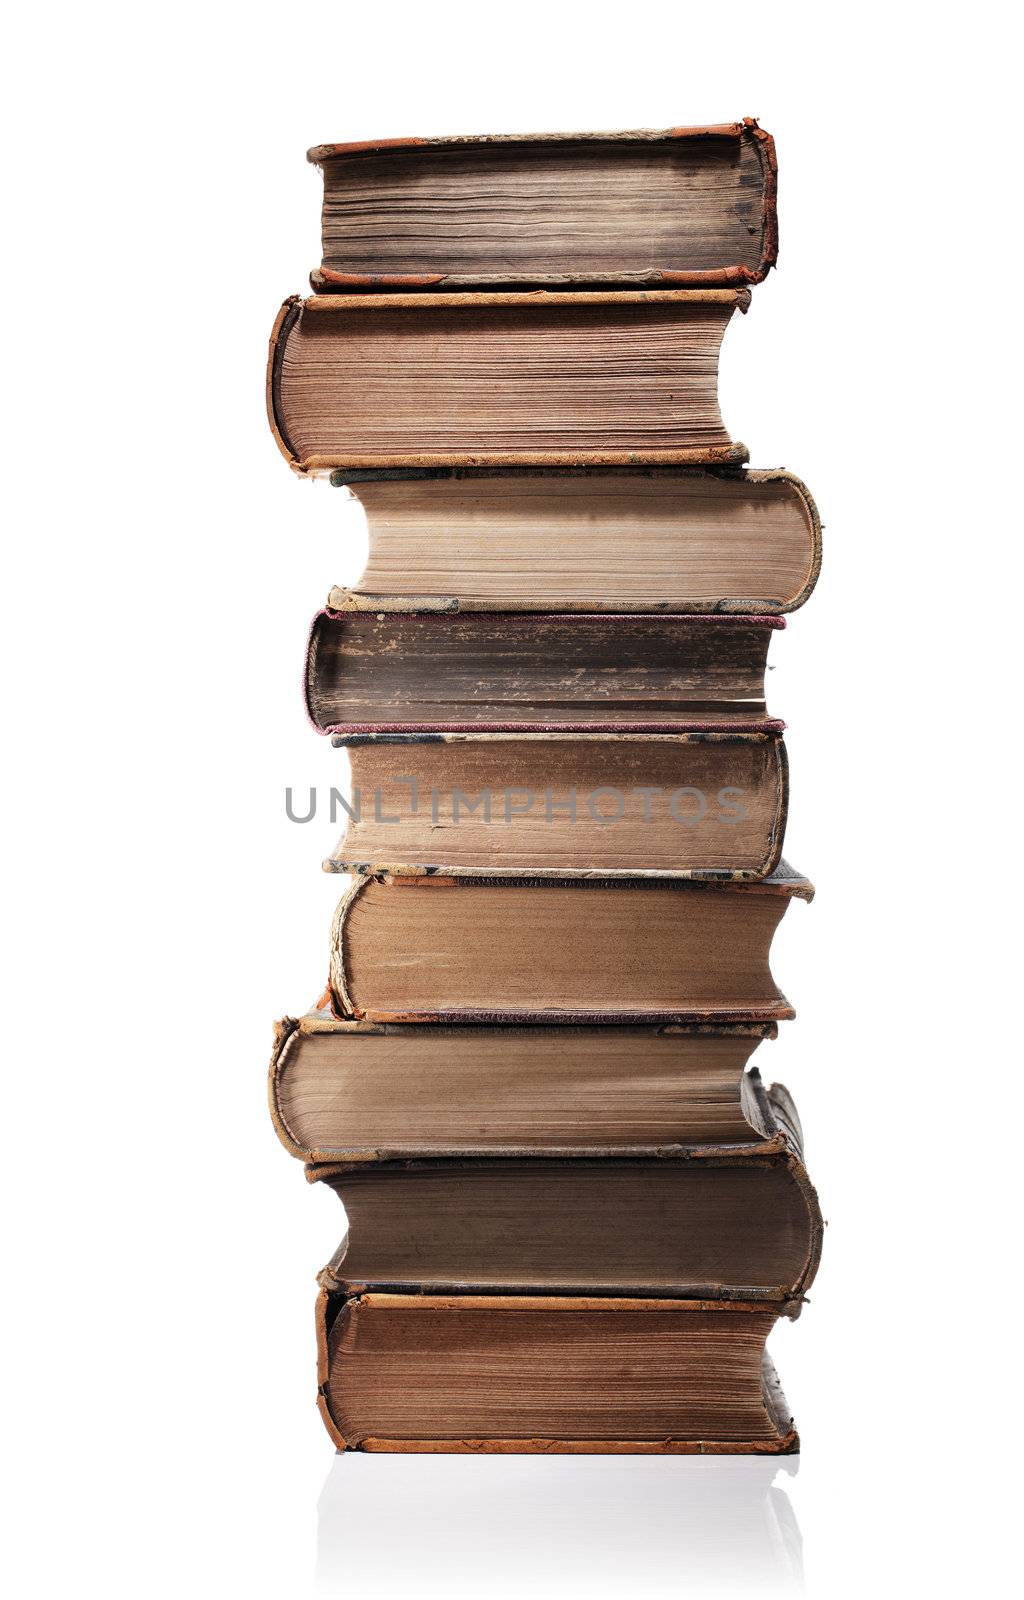 A Stack of old books isolated on white with natural reflection.